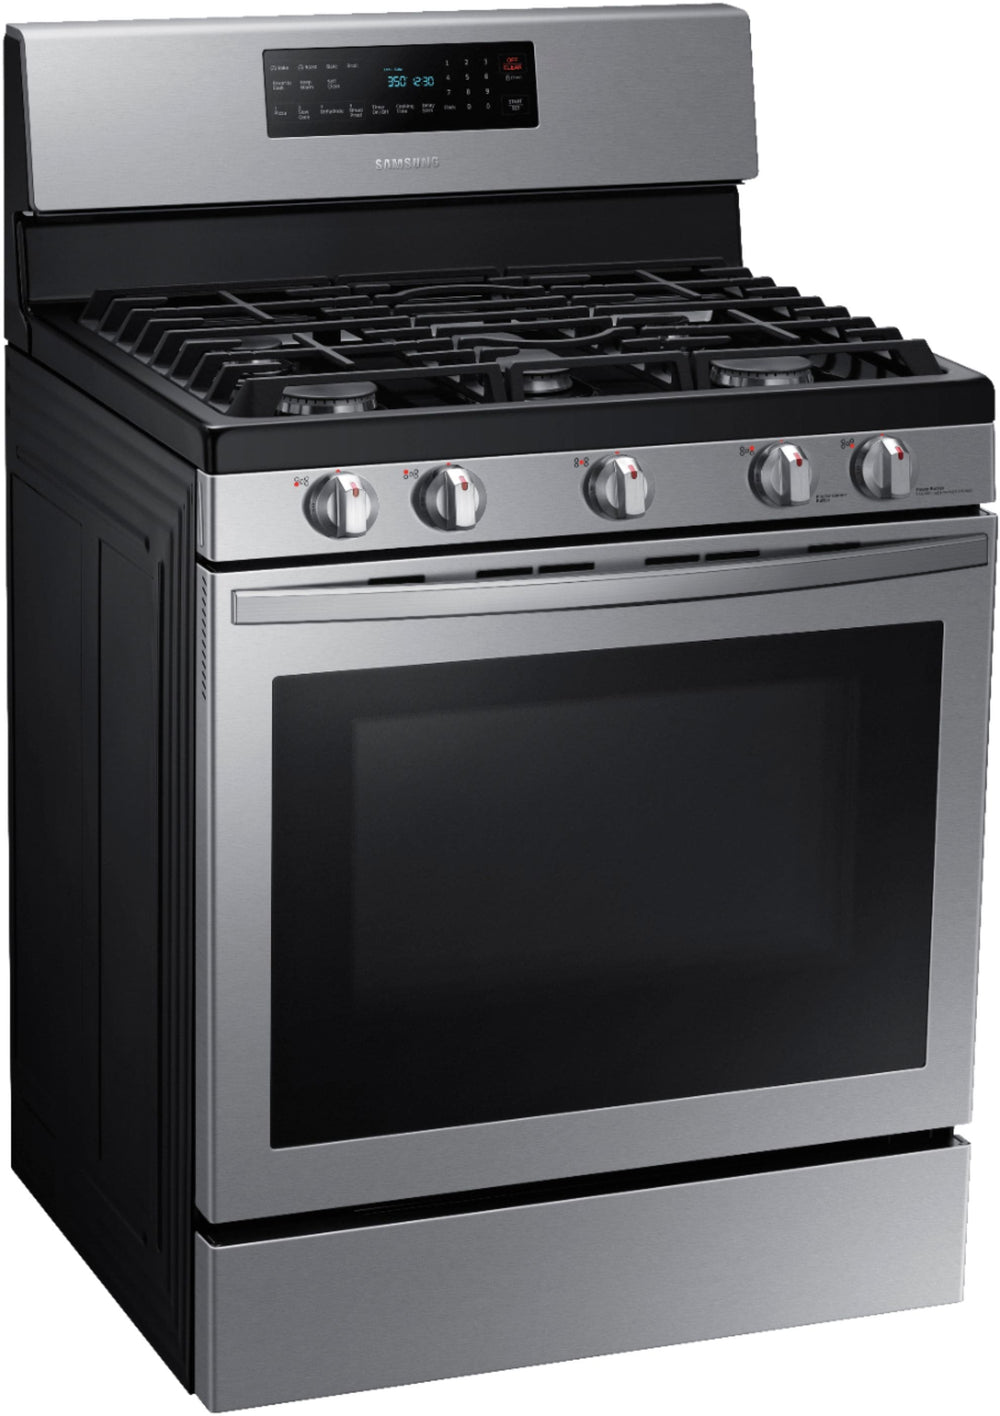 Samsung - 5.8 Cu. Ft. Freestanding Gas Convection Range with Air Fry - Stainless steel_1